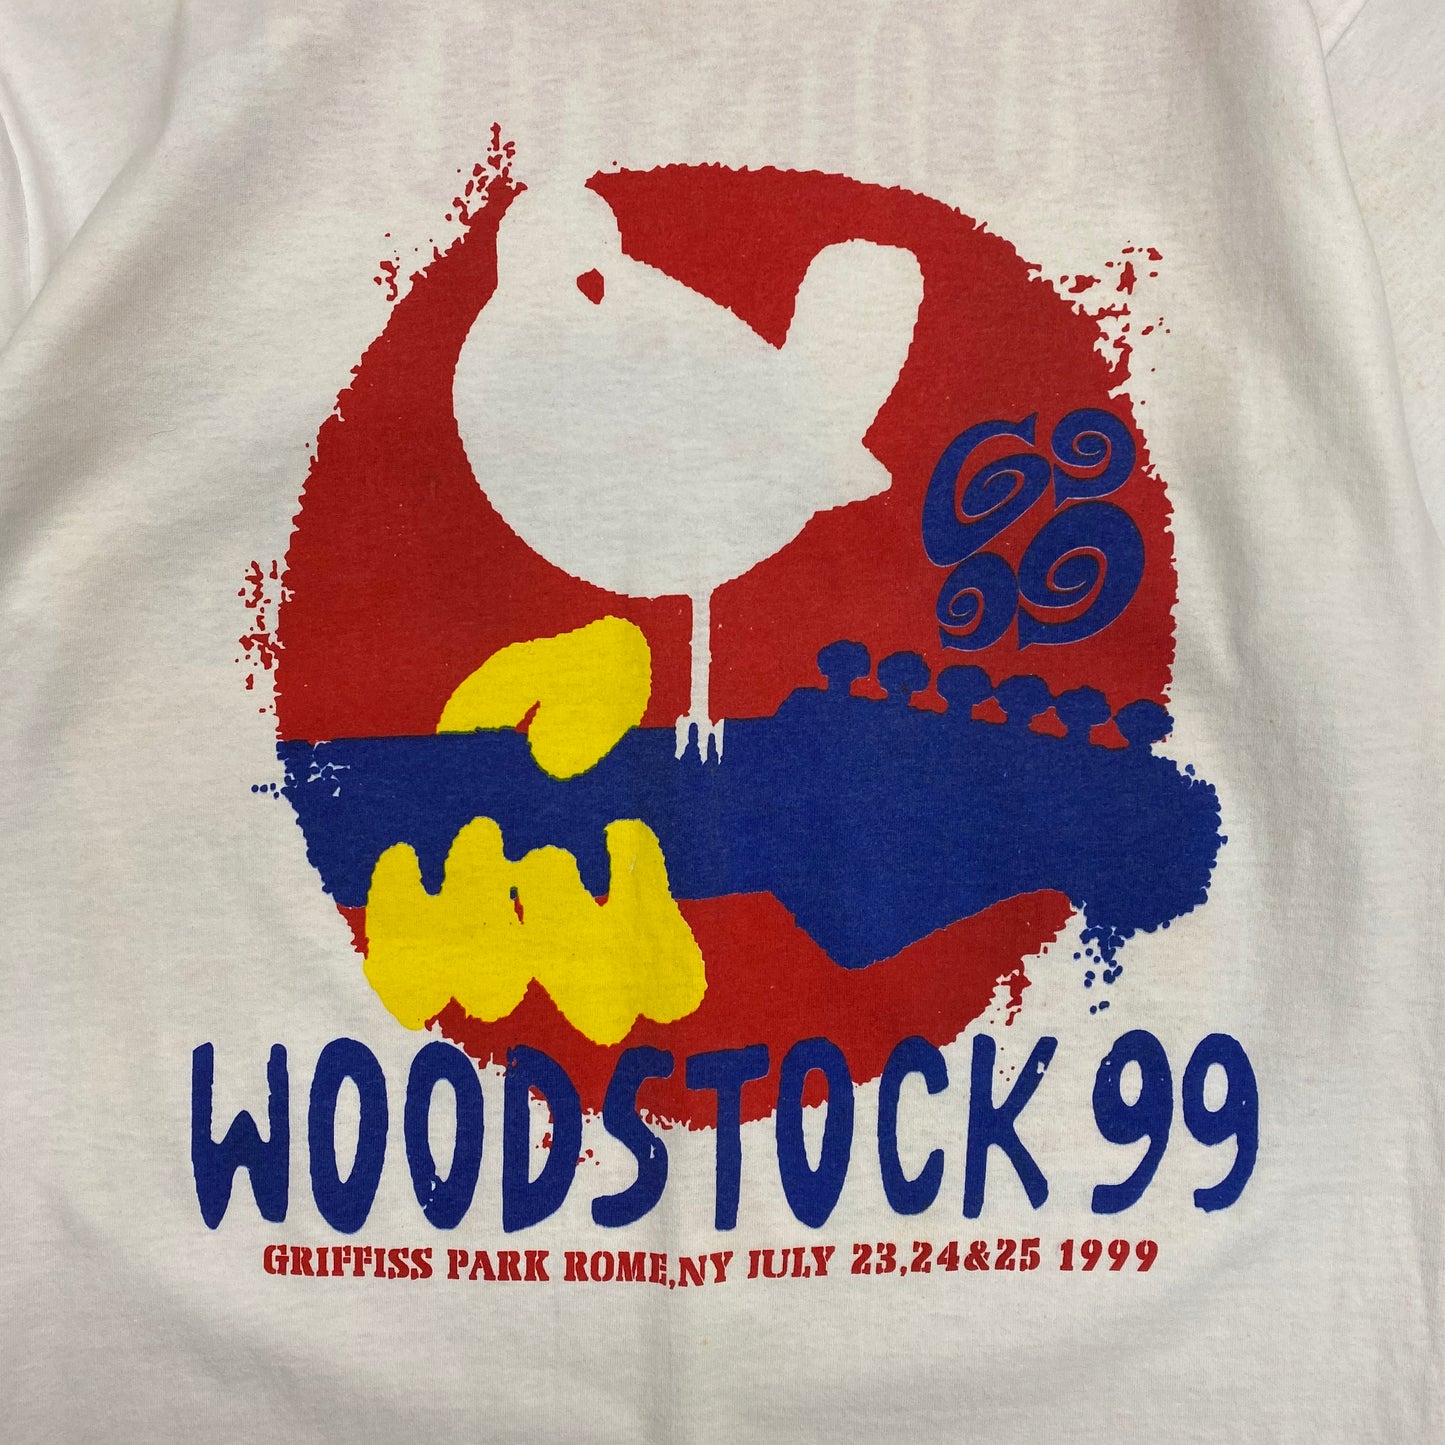 Woodstock '99 Logo Tee with Full Artist List - Size Large